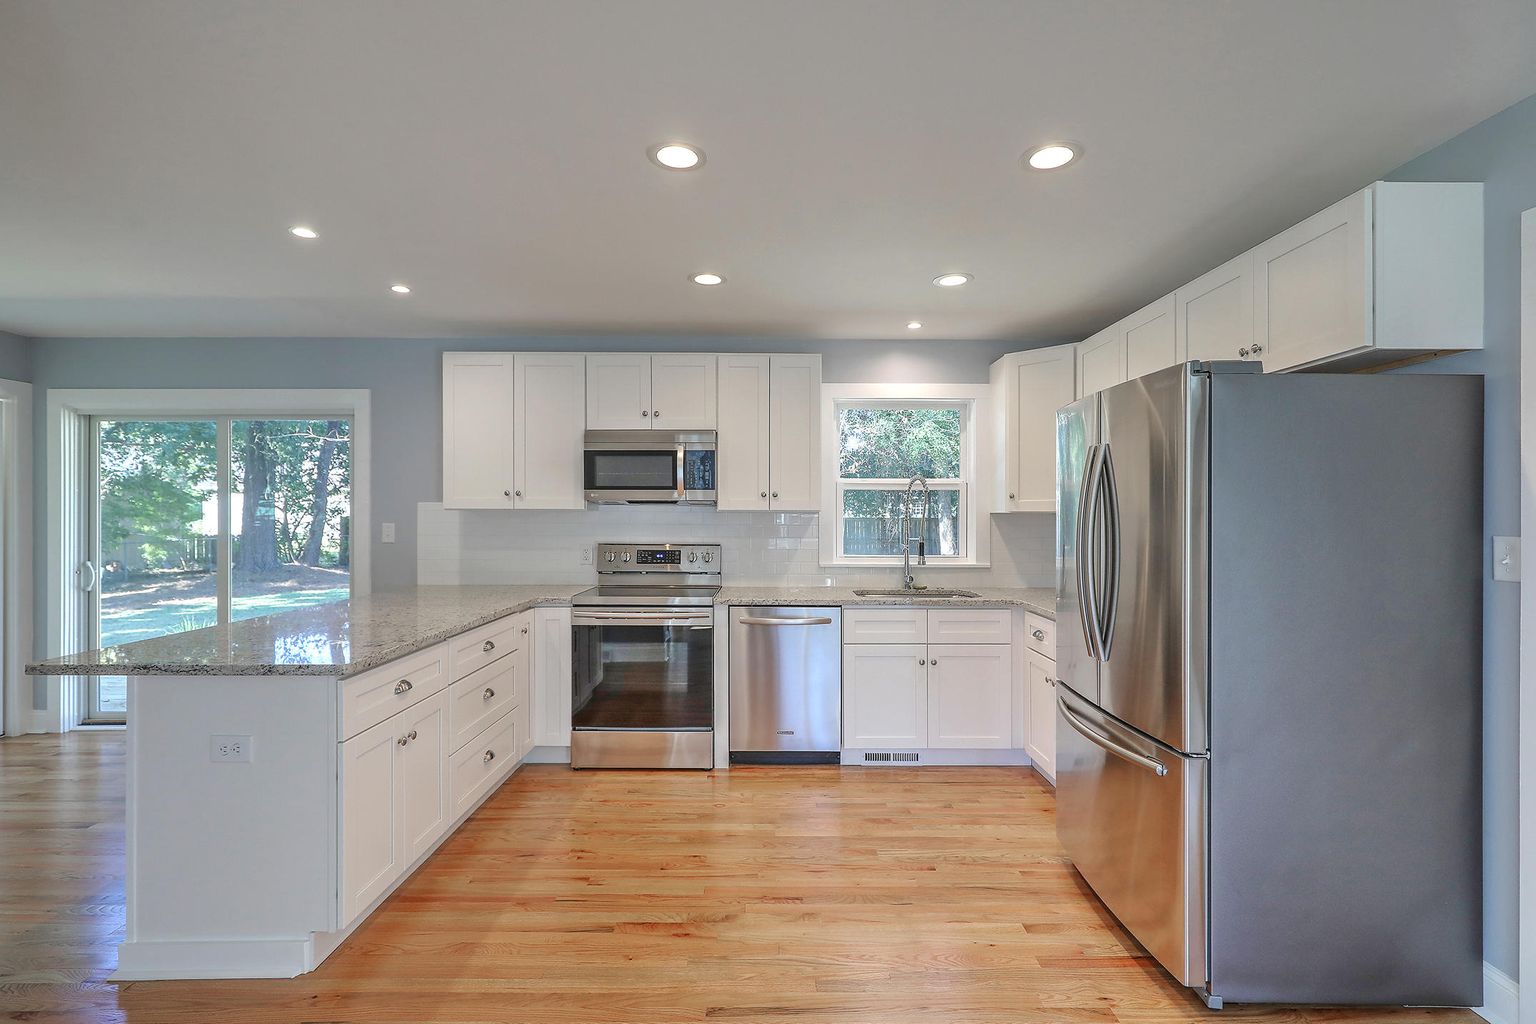 View of the kitchen with white theme